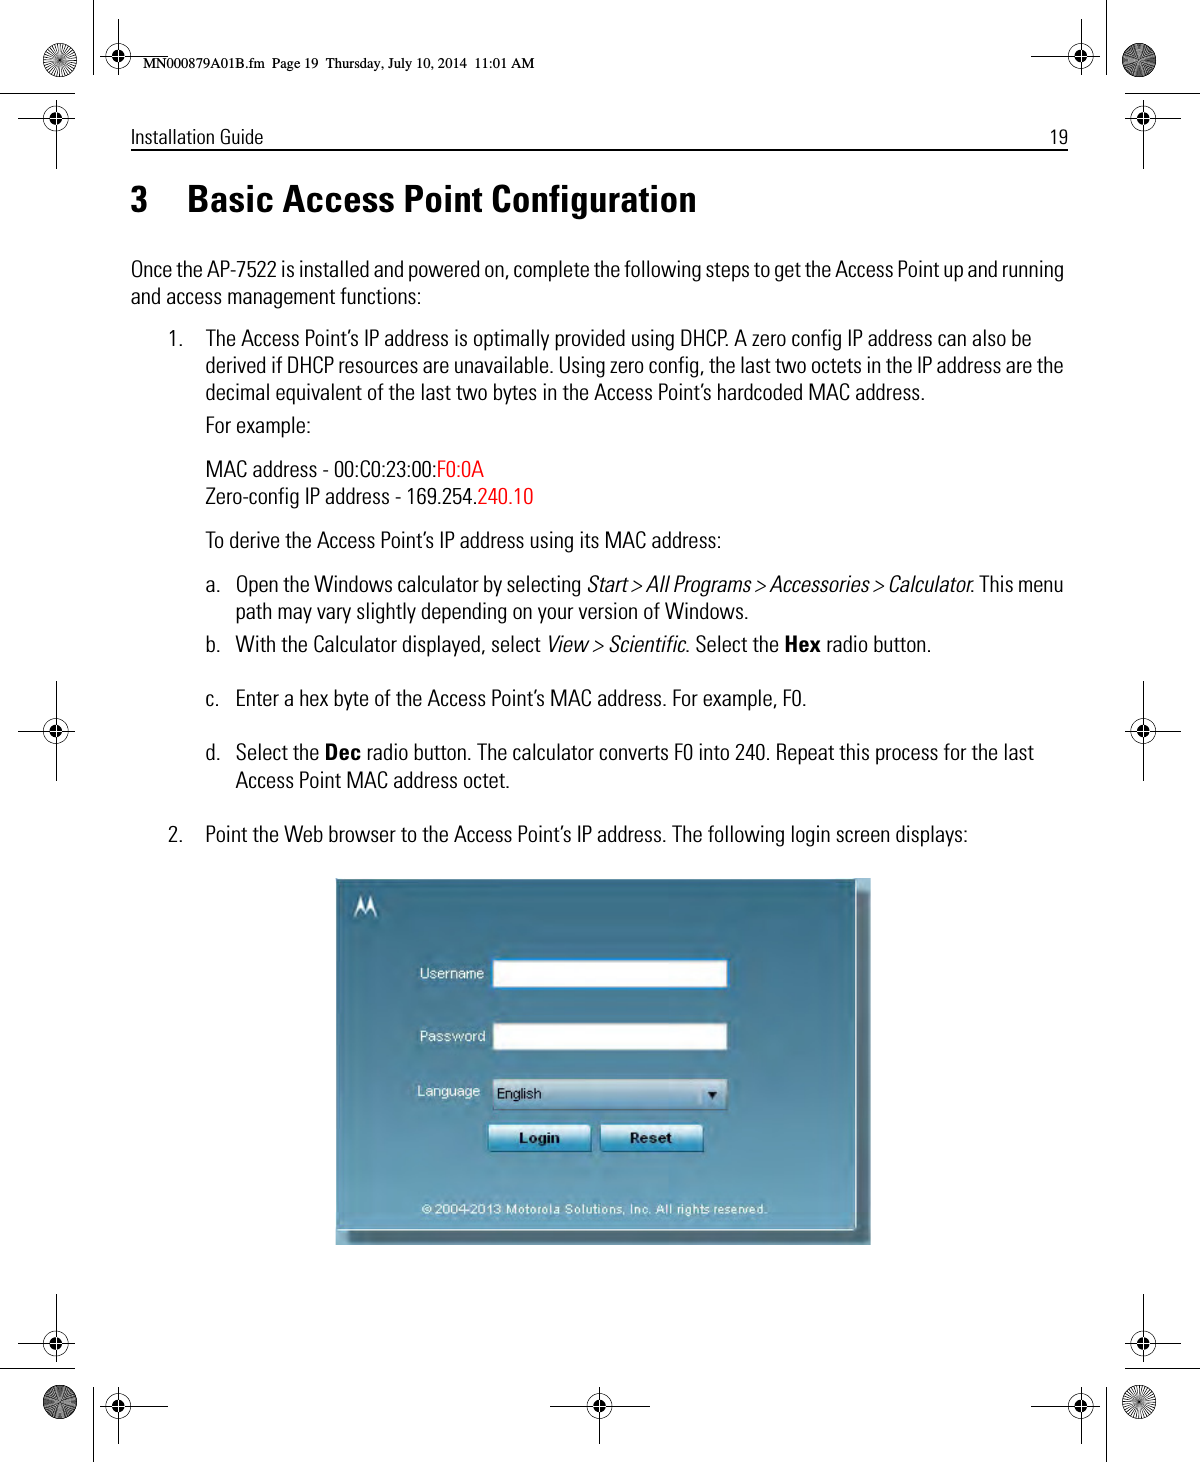 Installation Guide 193 Basic Access Point ConfigurationOnce the AP-7522 is installed and powered on, complete the following steps to get the Access Point up and running and access management functions:1. The Access Point’s IP address is optimally provided using DHCP. A zero config IP address can also be derived if DHCP resources are unavailable. Using zero config, the last two octets in the IP address are the decimal equivalent of the last two bytes in the Access Point’s hardcoded MAC address.For example:MAC address - 00:C0:23:00:F0:0A Zero-config IP address - 169.254.240.10To derive the Access Point’s IP address using its MAC address:a. Open the Windows calculator by selecting Start &gt; All Programs &gt; Accessories &gt; Calculator. This menu path may vary slightly depending on your version of Windows.b. With the Calculator displayed, select View &gt; Scientific. Select the Hex radio button.c. Enter a hex byte of the Access Point’s MAC address. For example, F0.d. Select the Dec radio button. The calculator converts F0 into 240. Repeat this process for the last Access Point MAC address octet.2. Point the Web browser to the Access Point’s IP address. The following login screen displays:MN000879A01B.fm  Page 19  Thursday, July 10, 2014  11:01 AM